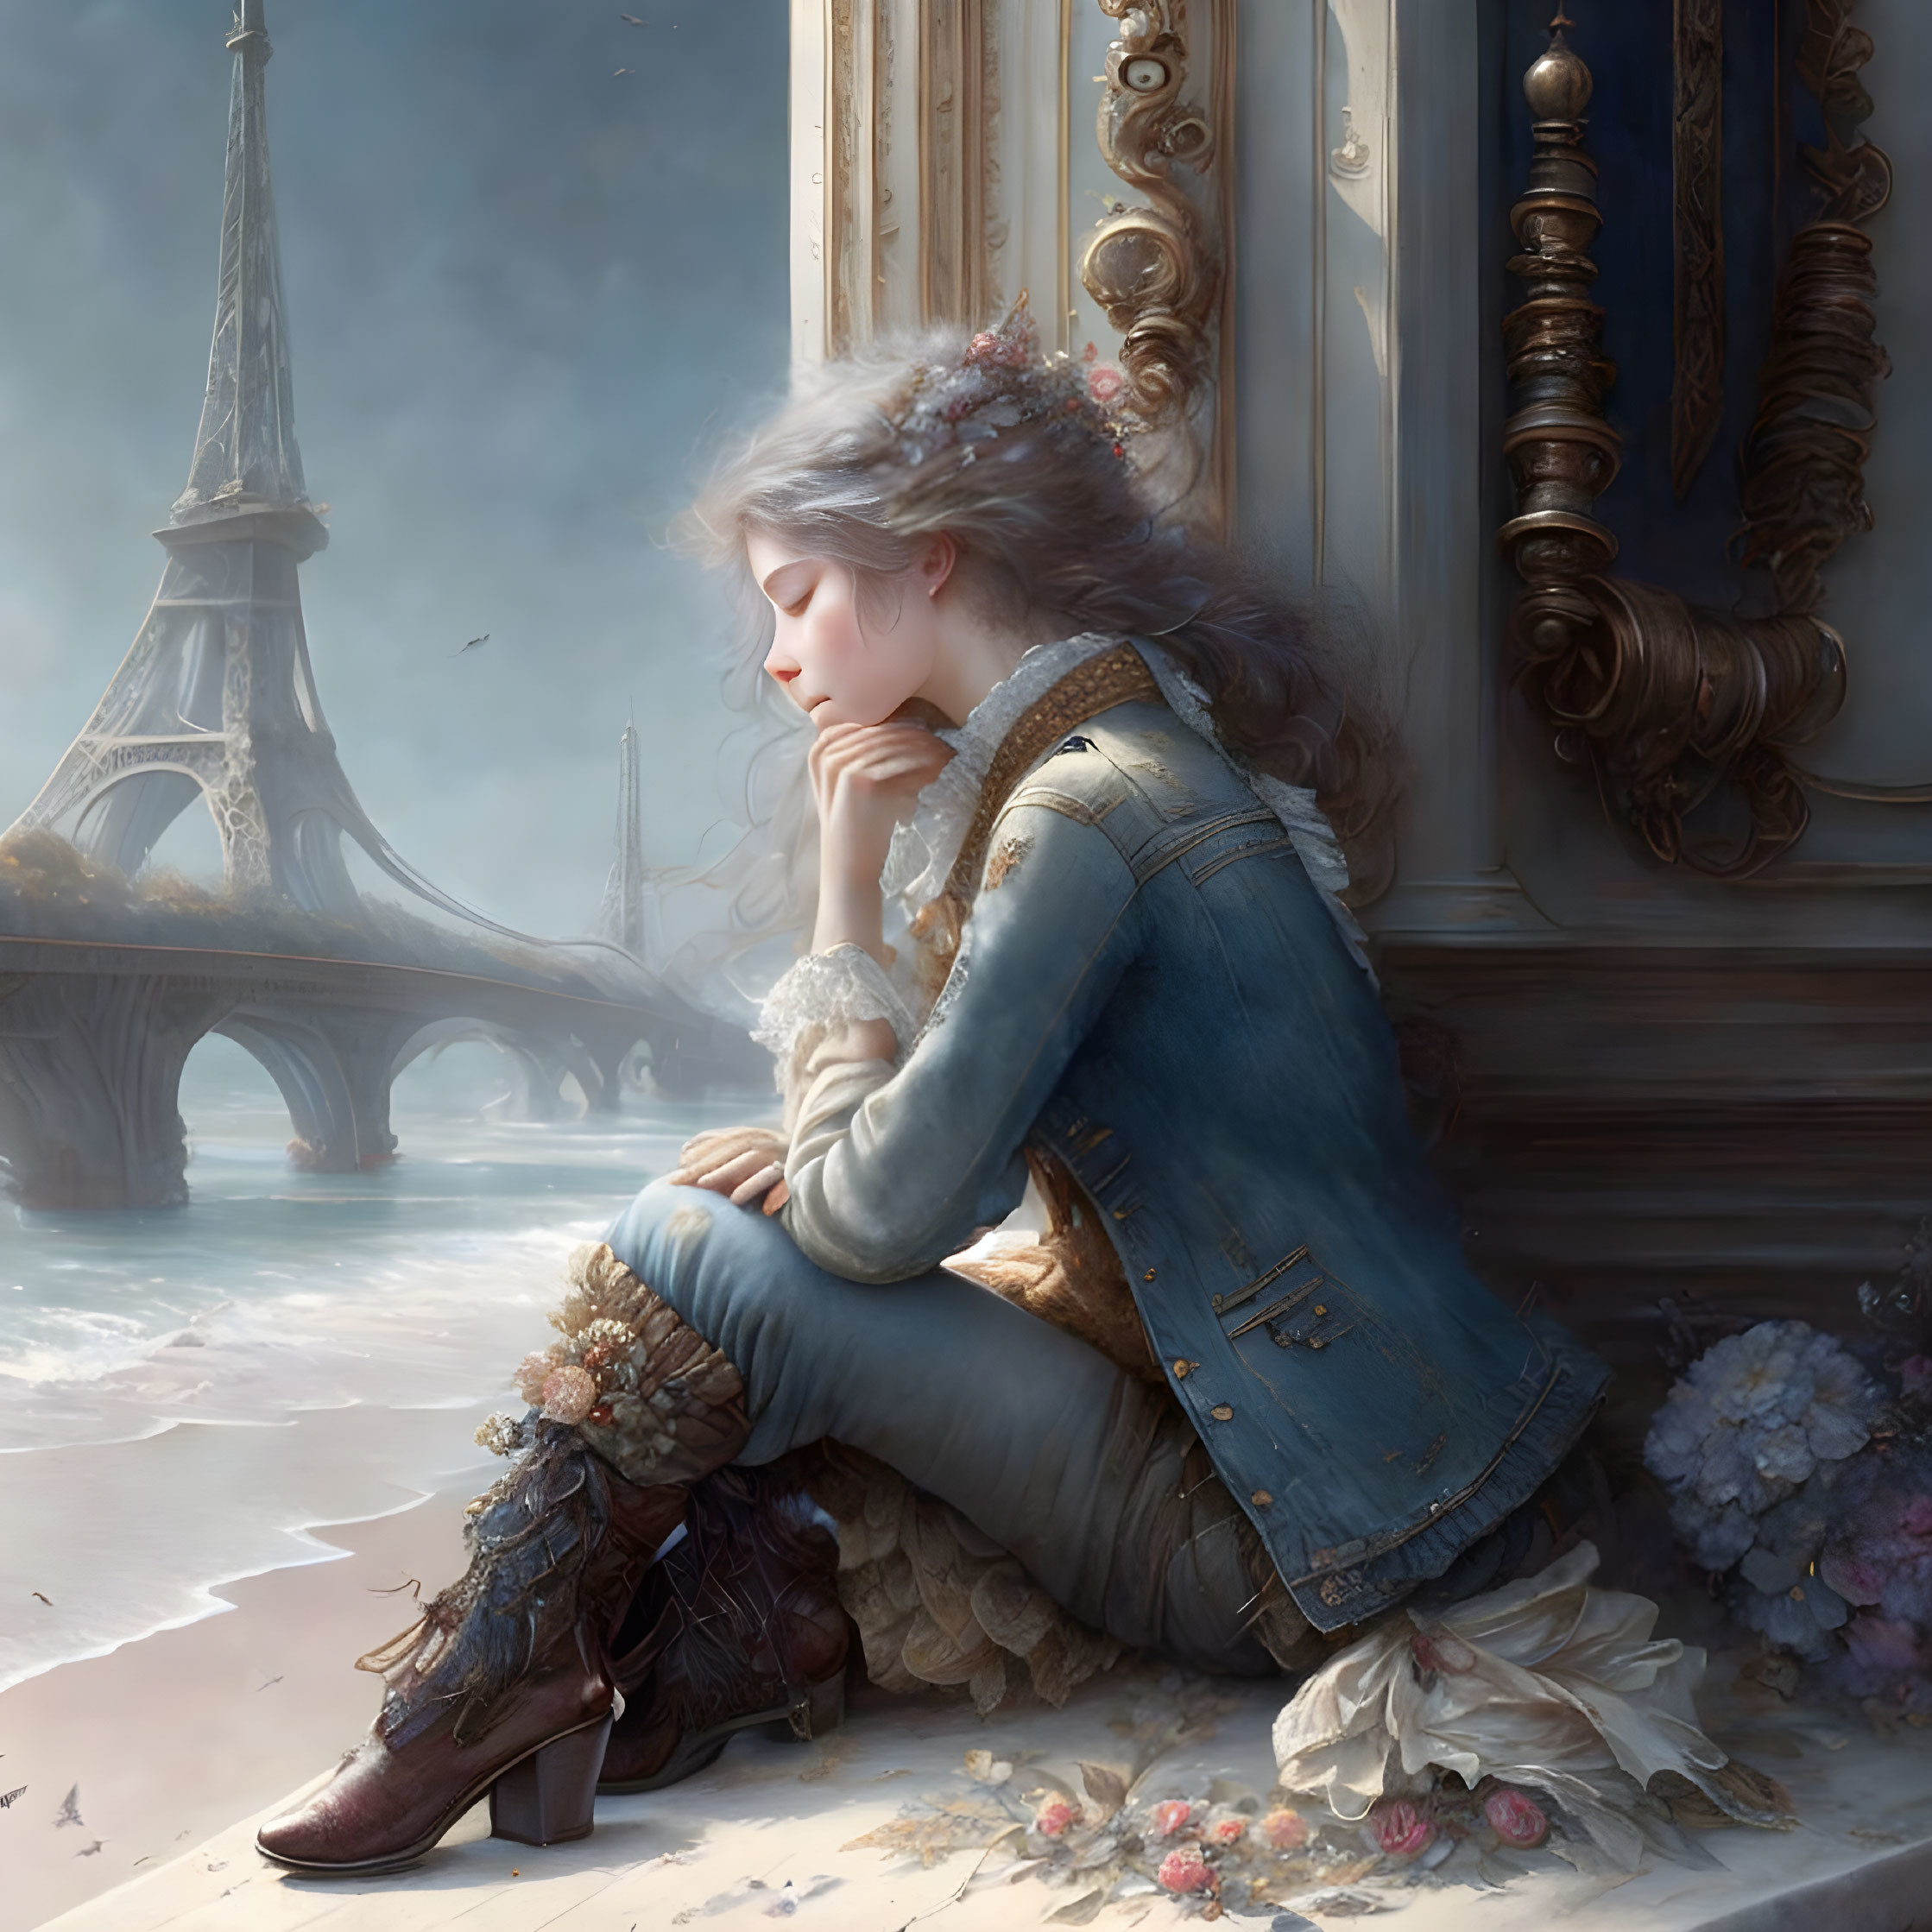 Young woman in denim jacket and ornate dress gazes out window at castle-like cityscape